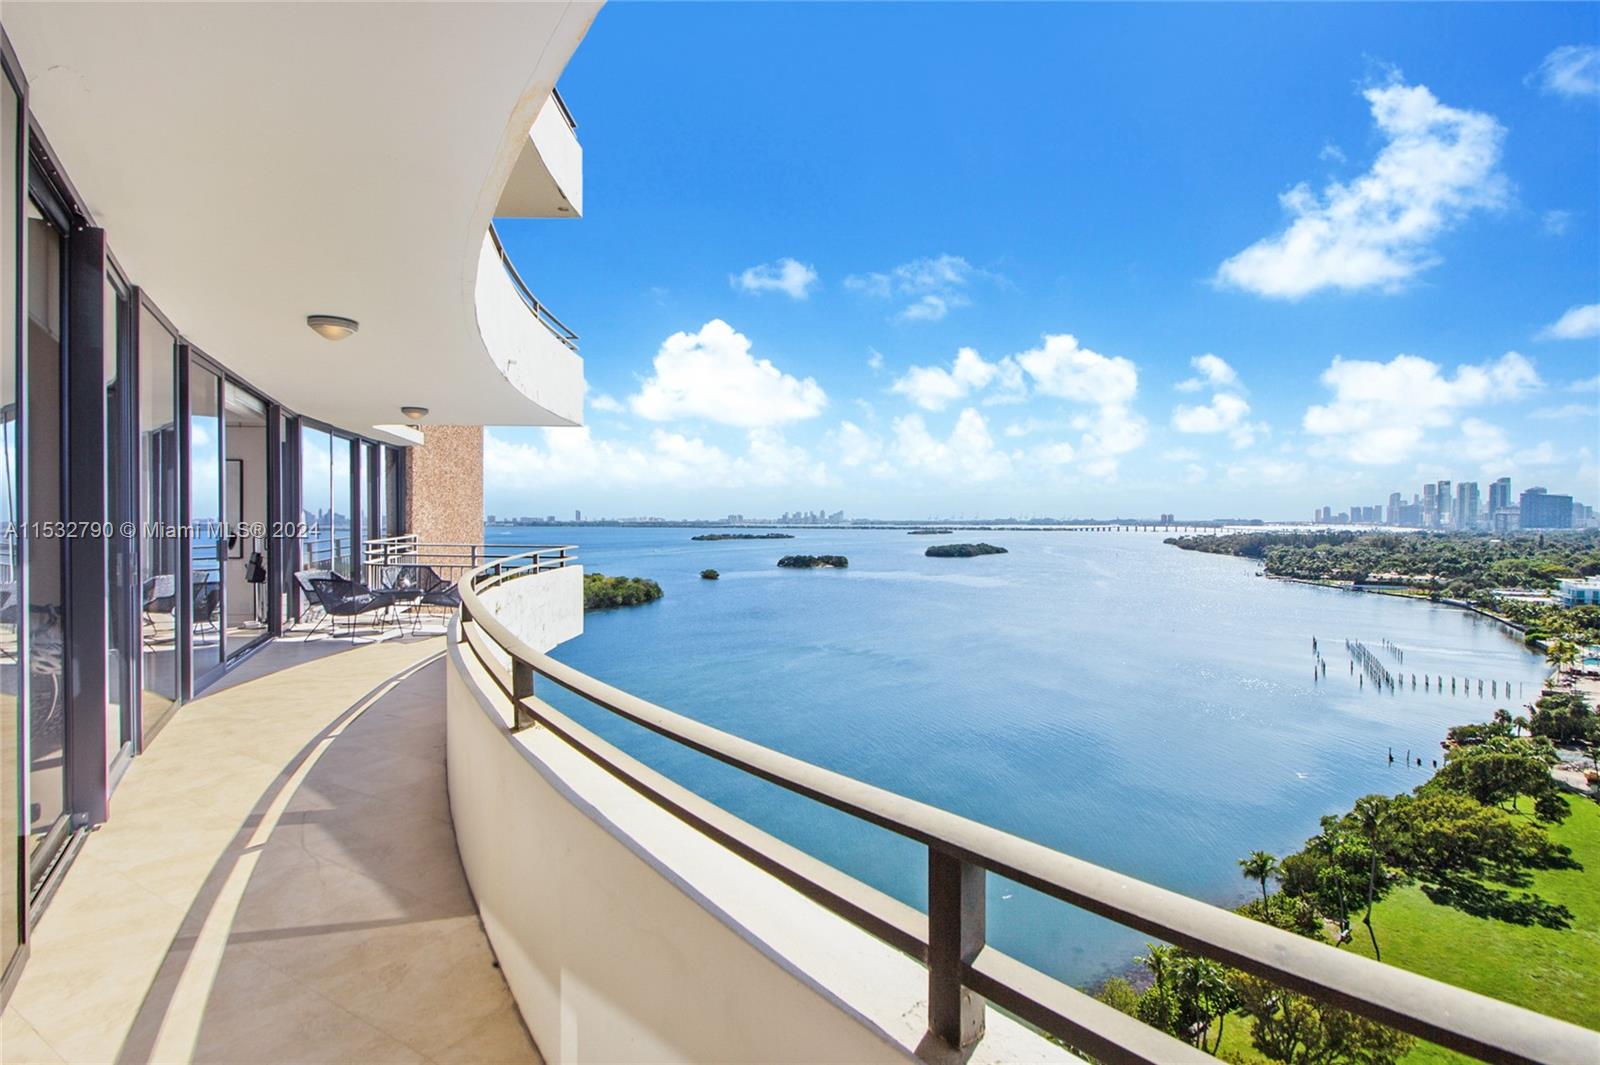 This spacious and fully renovated waterfront residence at the iconic Palm Bay Towers in Miami’s Upper Eastside is a rare find.With almost 3,000 sq. ft. of living space, this triangle-shaped unit offers breathtaking views of Biscayne Bay, Miami Beach, the downtown skyline and beyond.The building is equipped with a 24-hour secured lobby and only 3 units per floor.Enjoy the convenience of being close to trendy restaurants, shops, and the Miami Design District.The unit features a contemporary style with a gourmet kitchen and sleek bathrooms.A large open area is perfect for a home office or den.The building offers tennis courts, pickleball, gym, and pool with bbq grills.The lush, secure, gate-guarded grounds offer acres of greenery and tranquility.Palm Bay Towers and marina is under renovation.